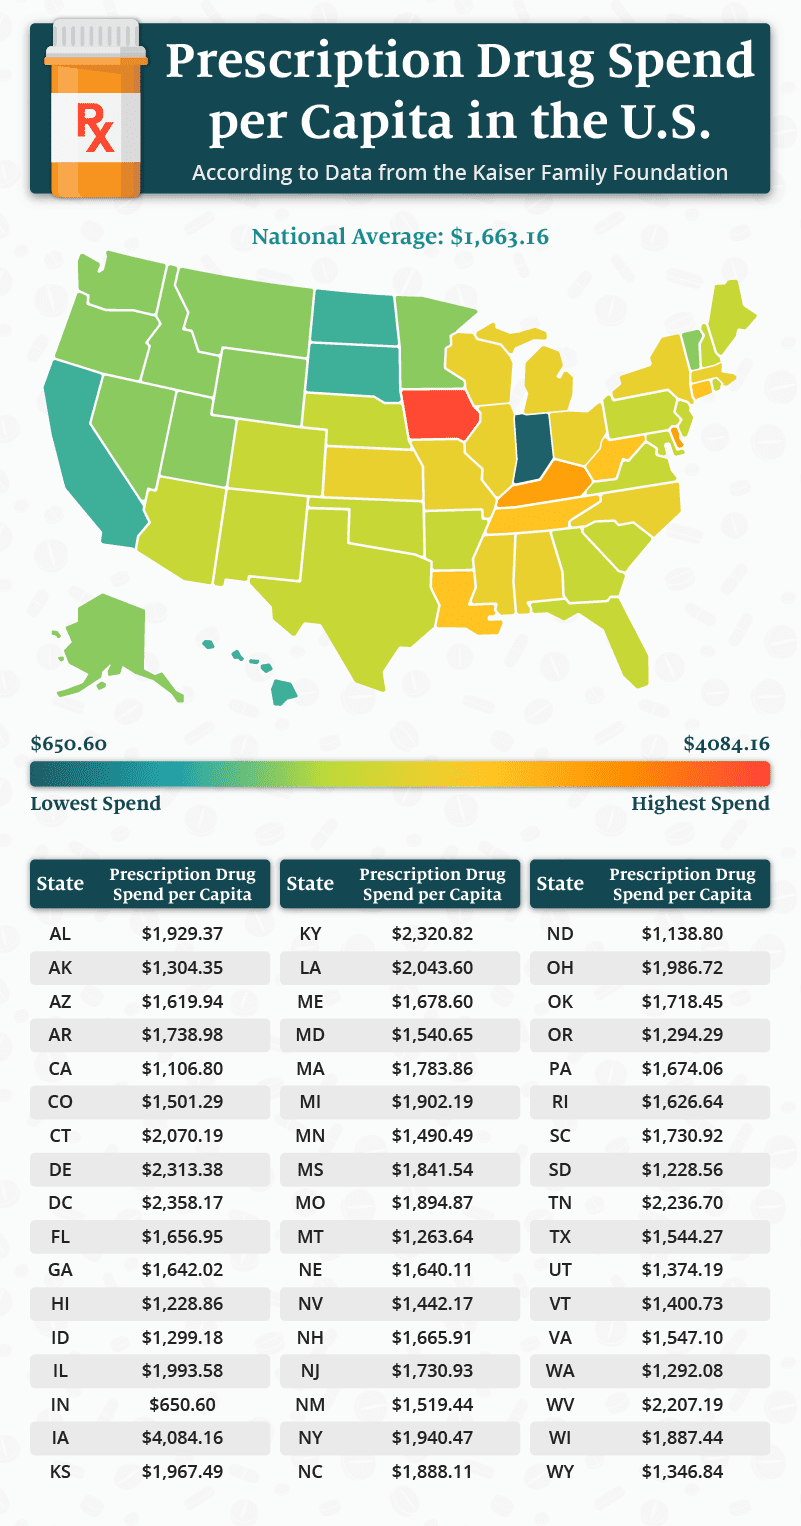 A U.S. map showing the states that spend the most on prescription drugs